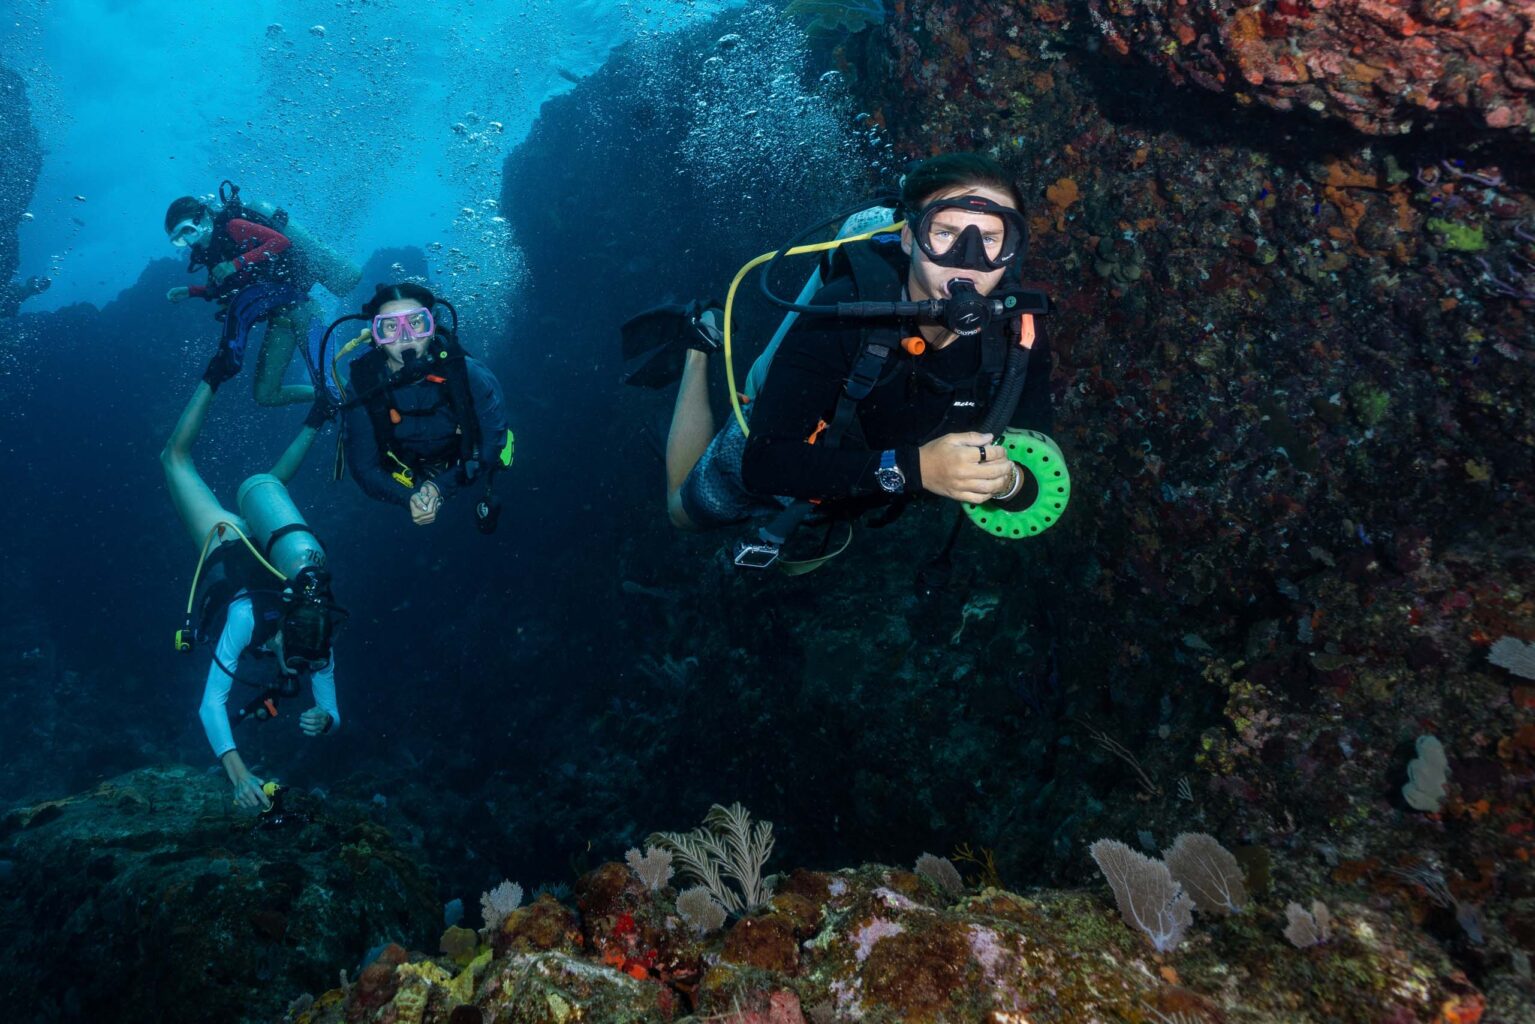 A group of scuba divers in a coral reef.